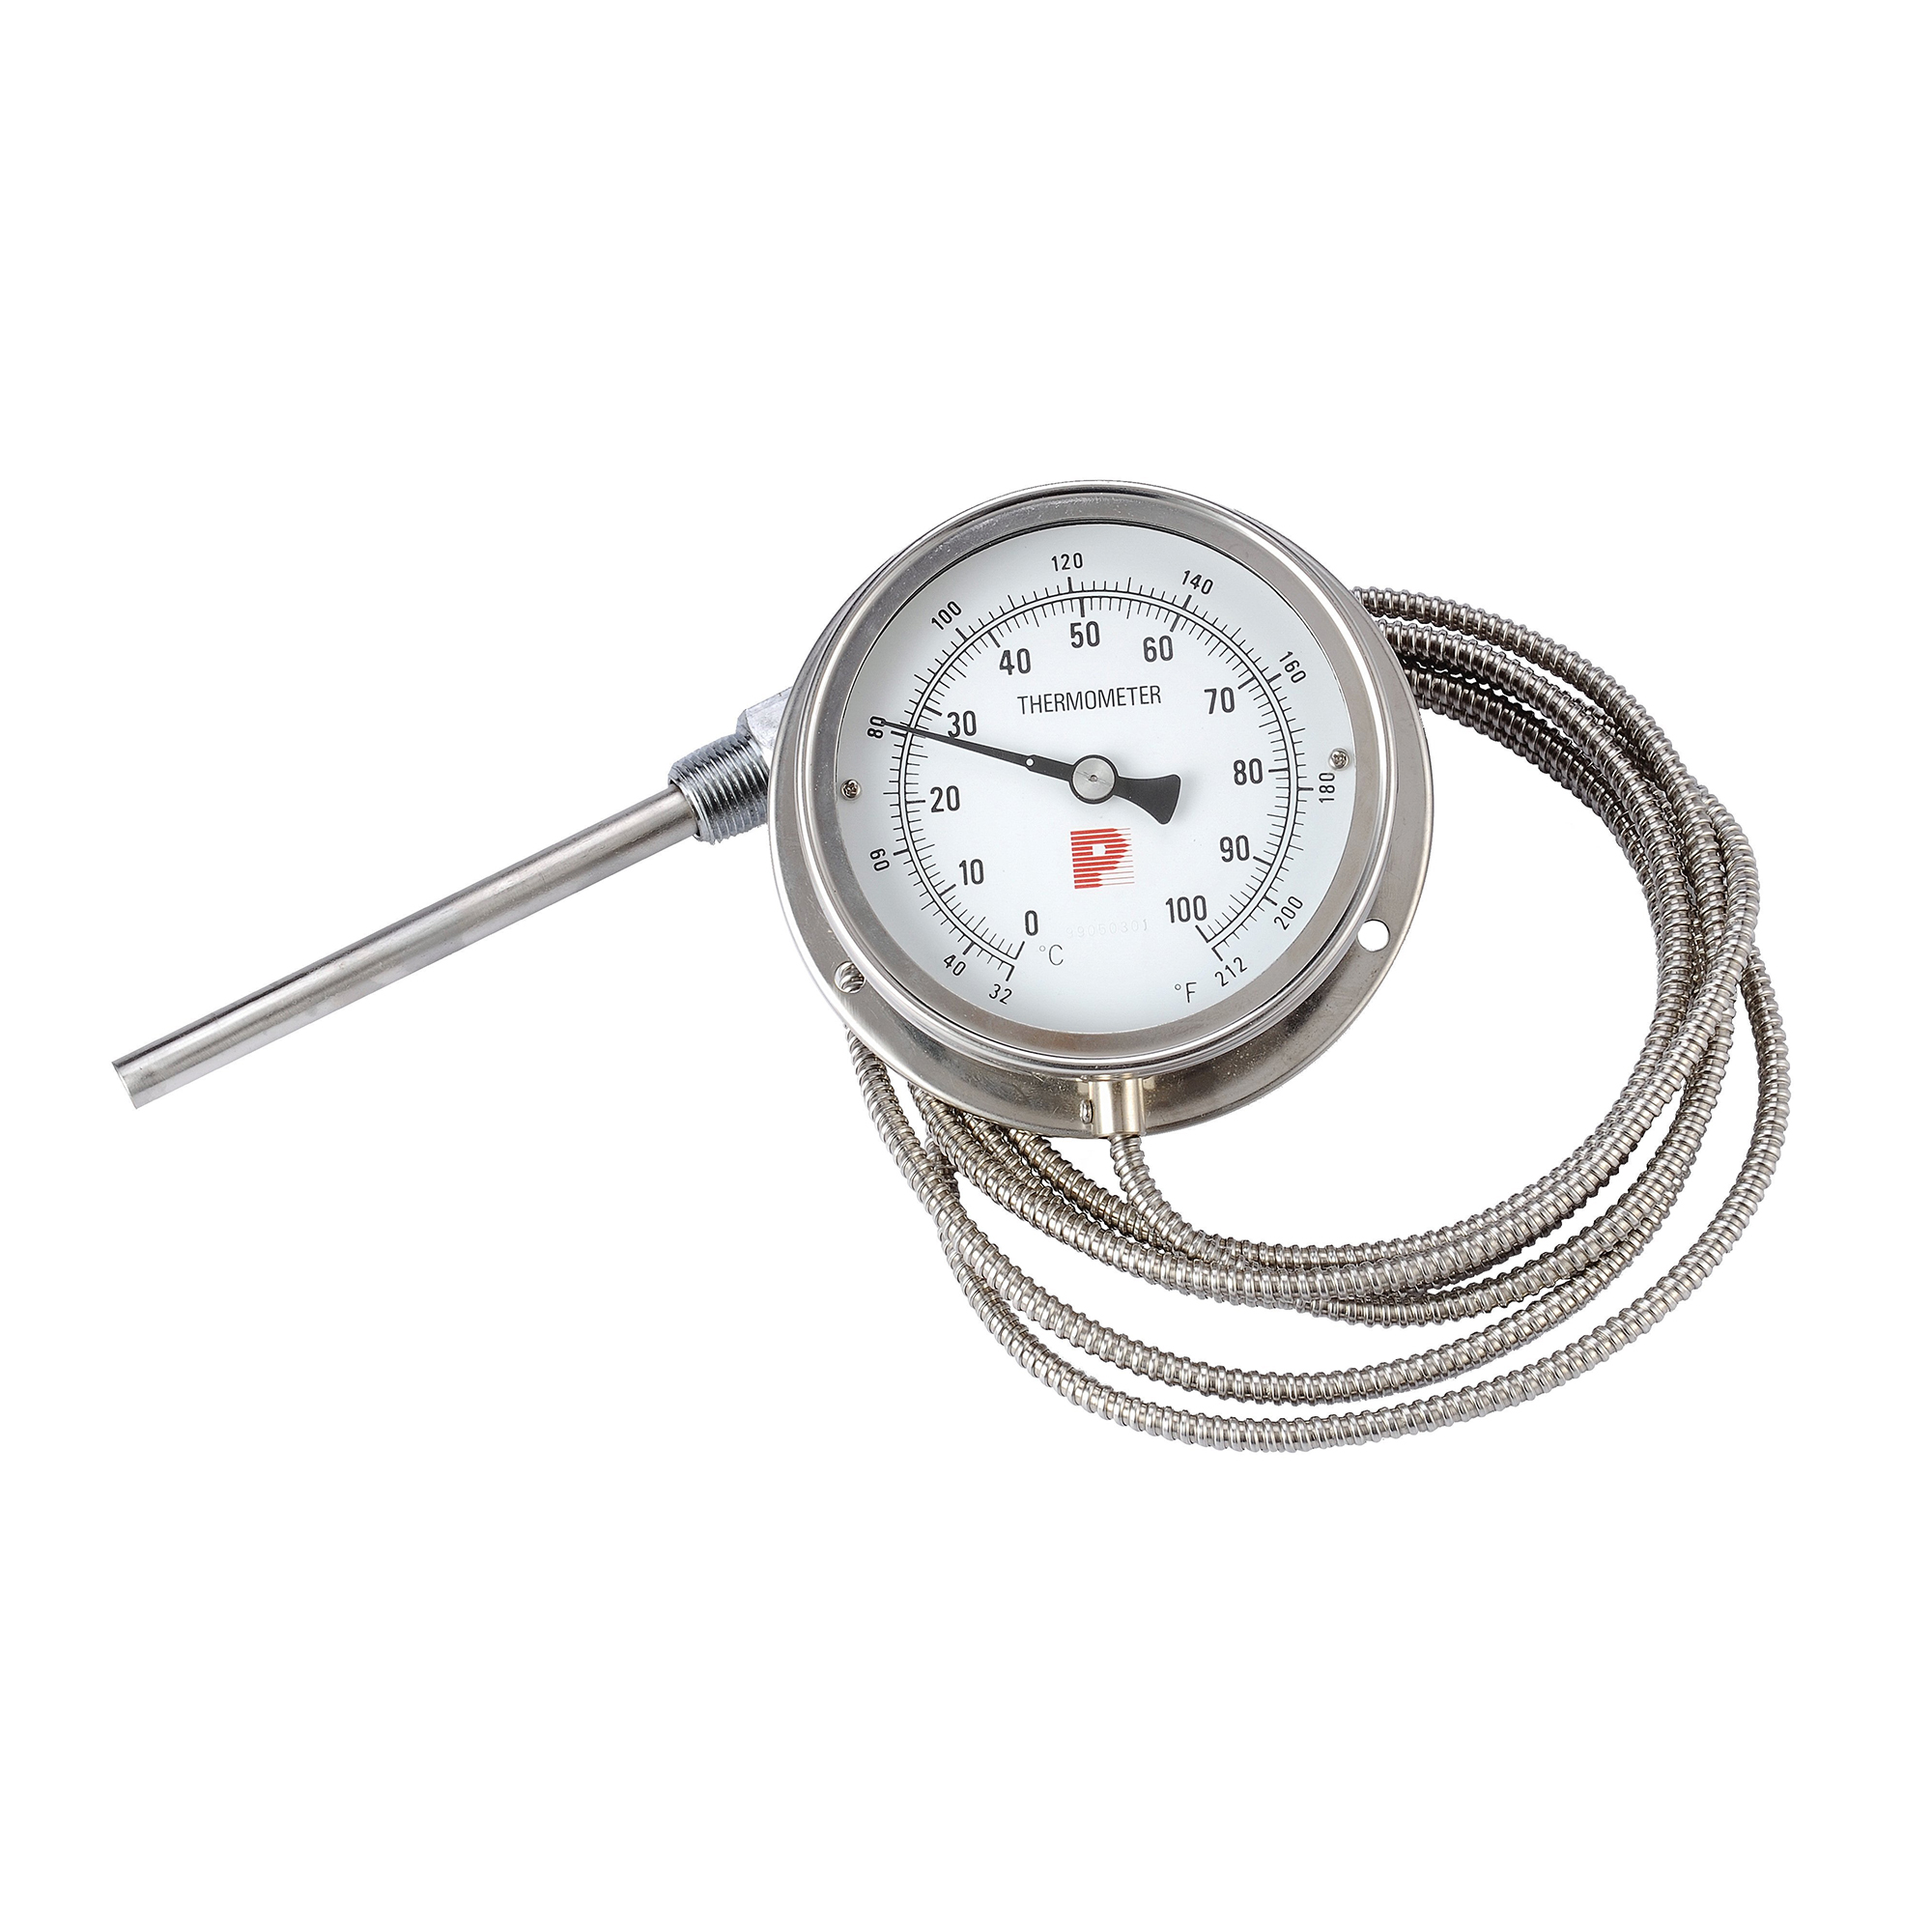 Stainless steel capillary thermometer (bottom type)